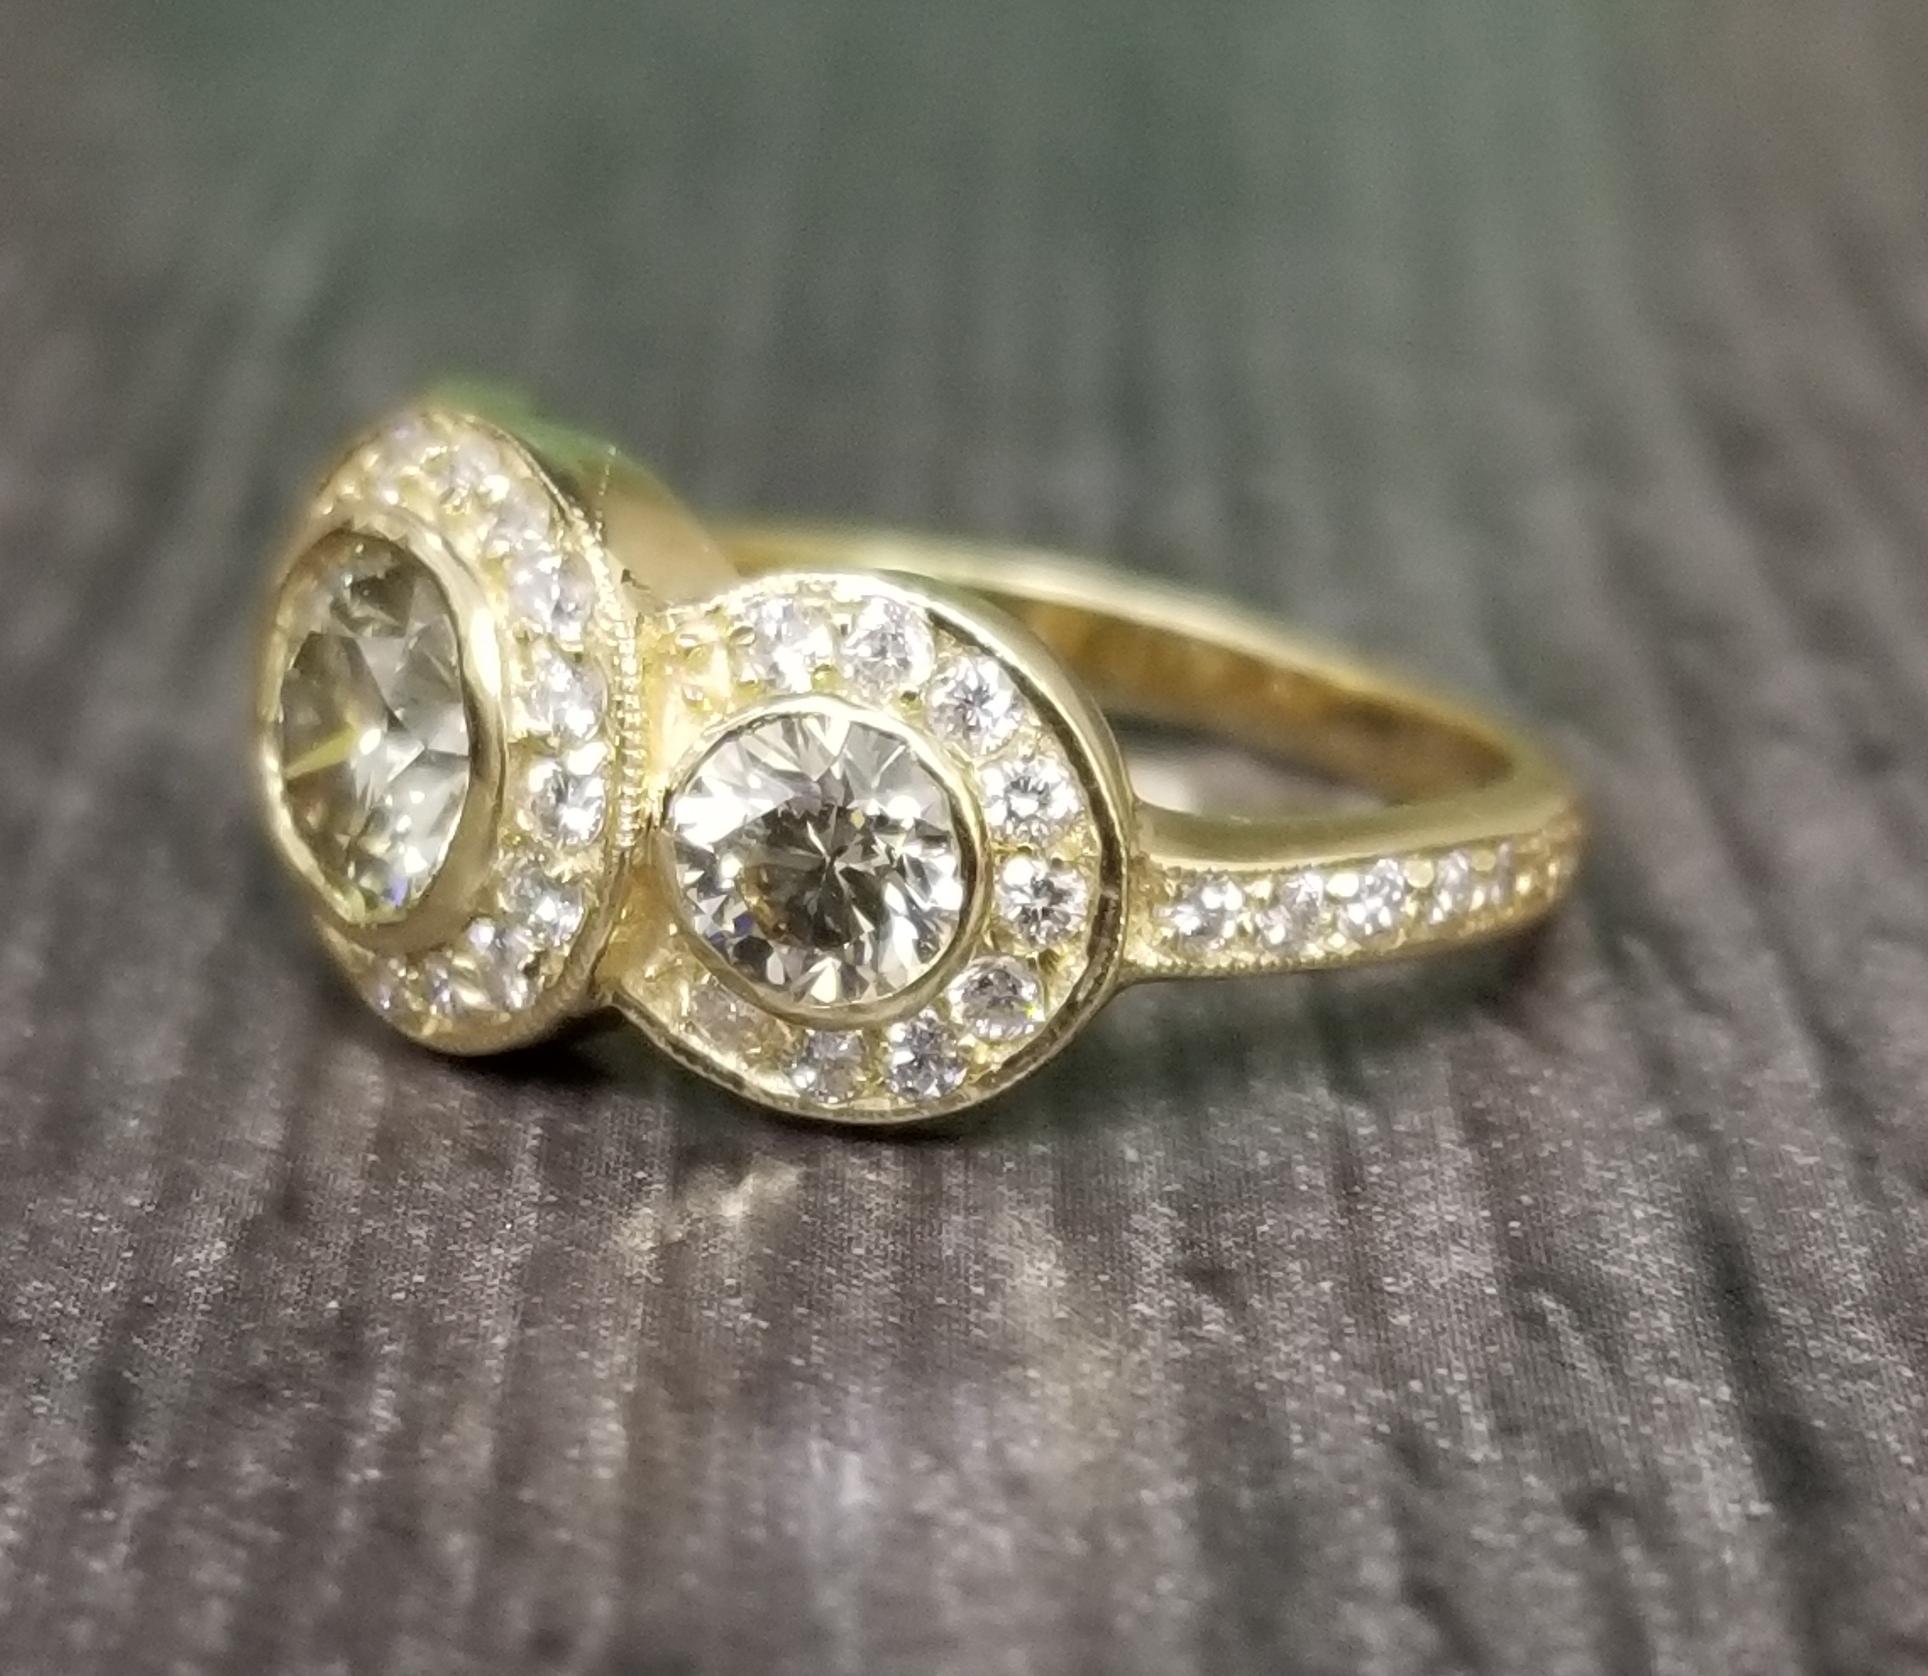 18k yellow gold ladies 3 stone halo ring containing 3 yellow diamonds weighing 1-.75pts., 2-.78pts., also 43 round full cut diamonds of very fine quality weighing .58pts.